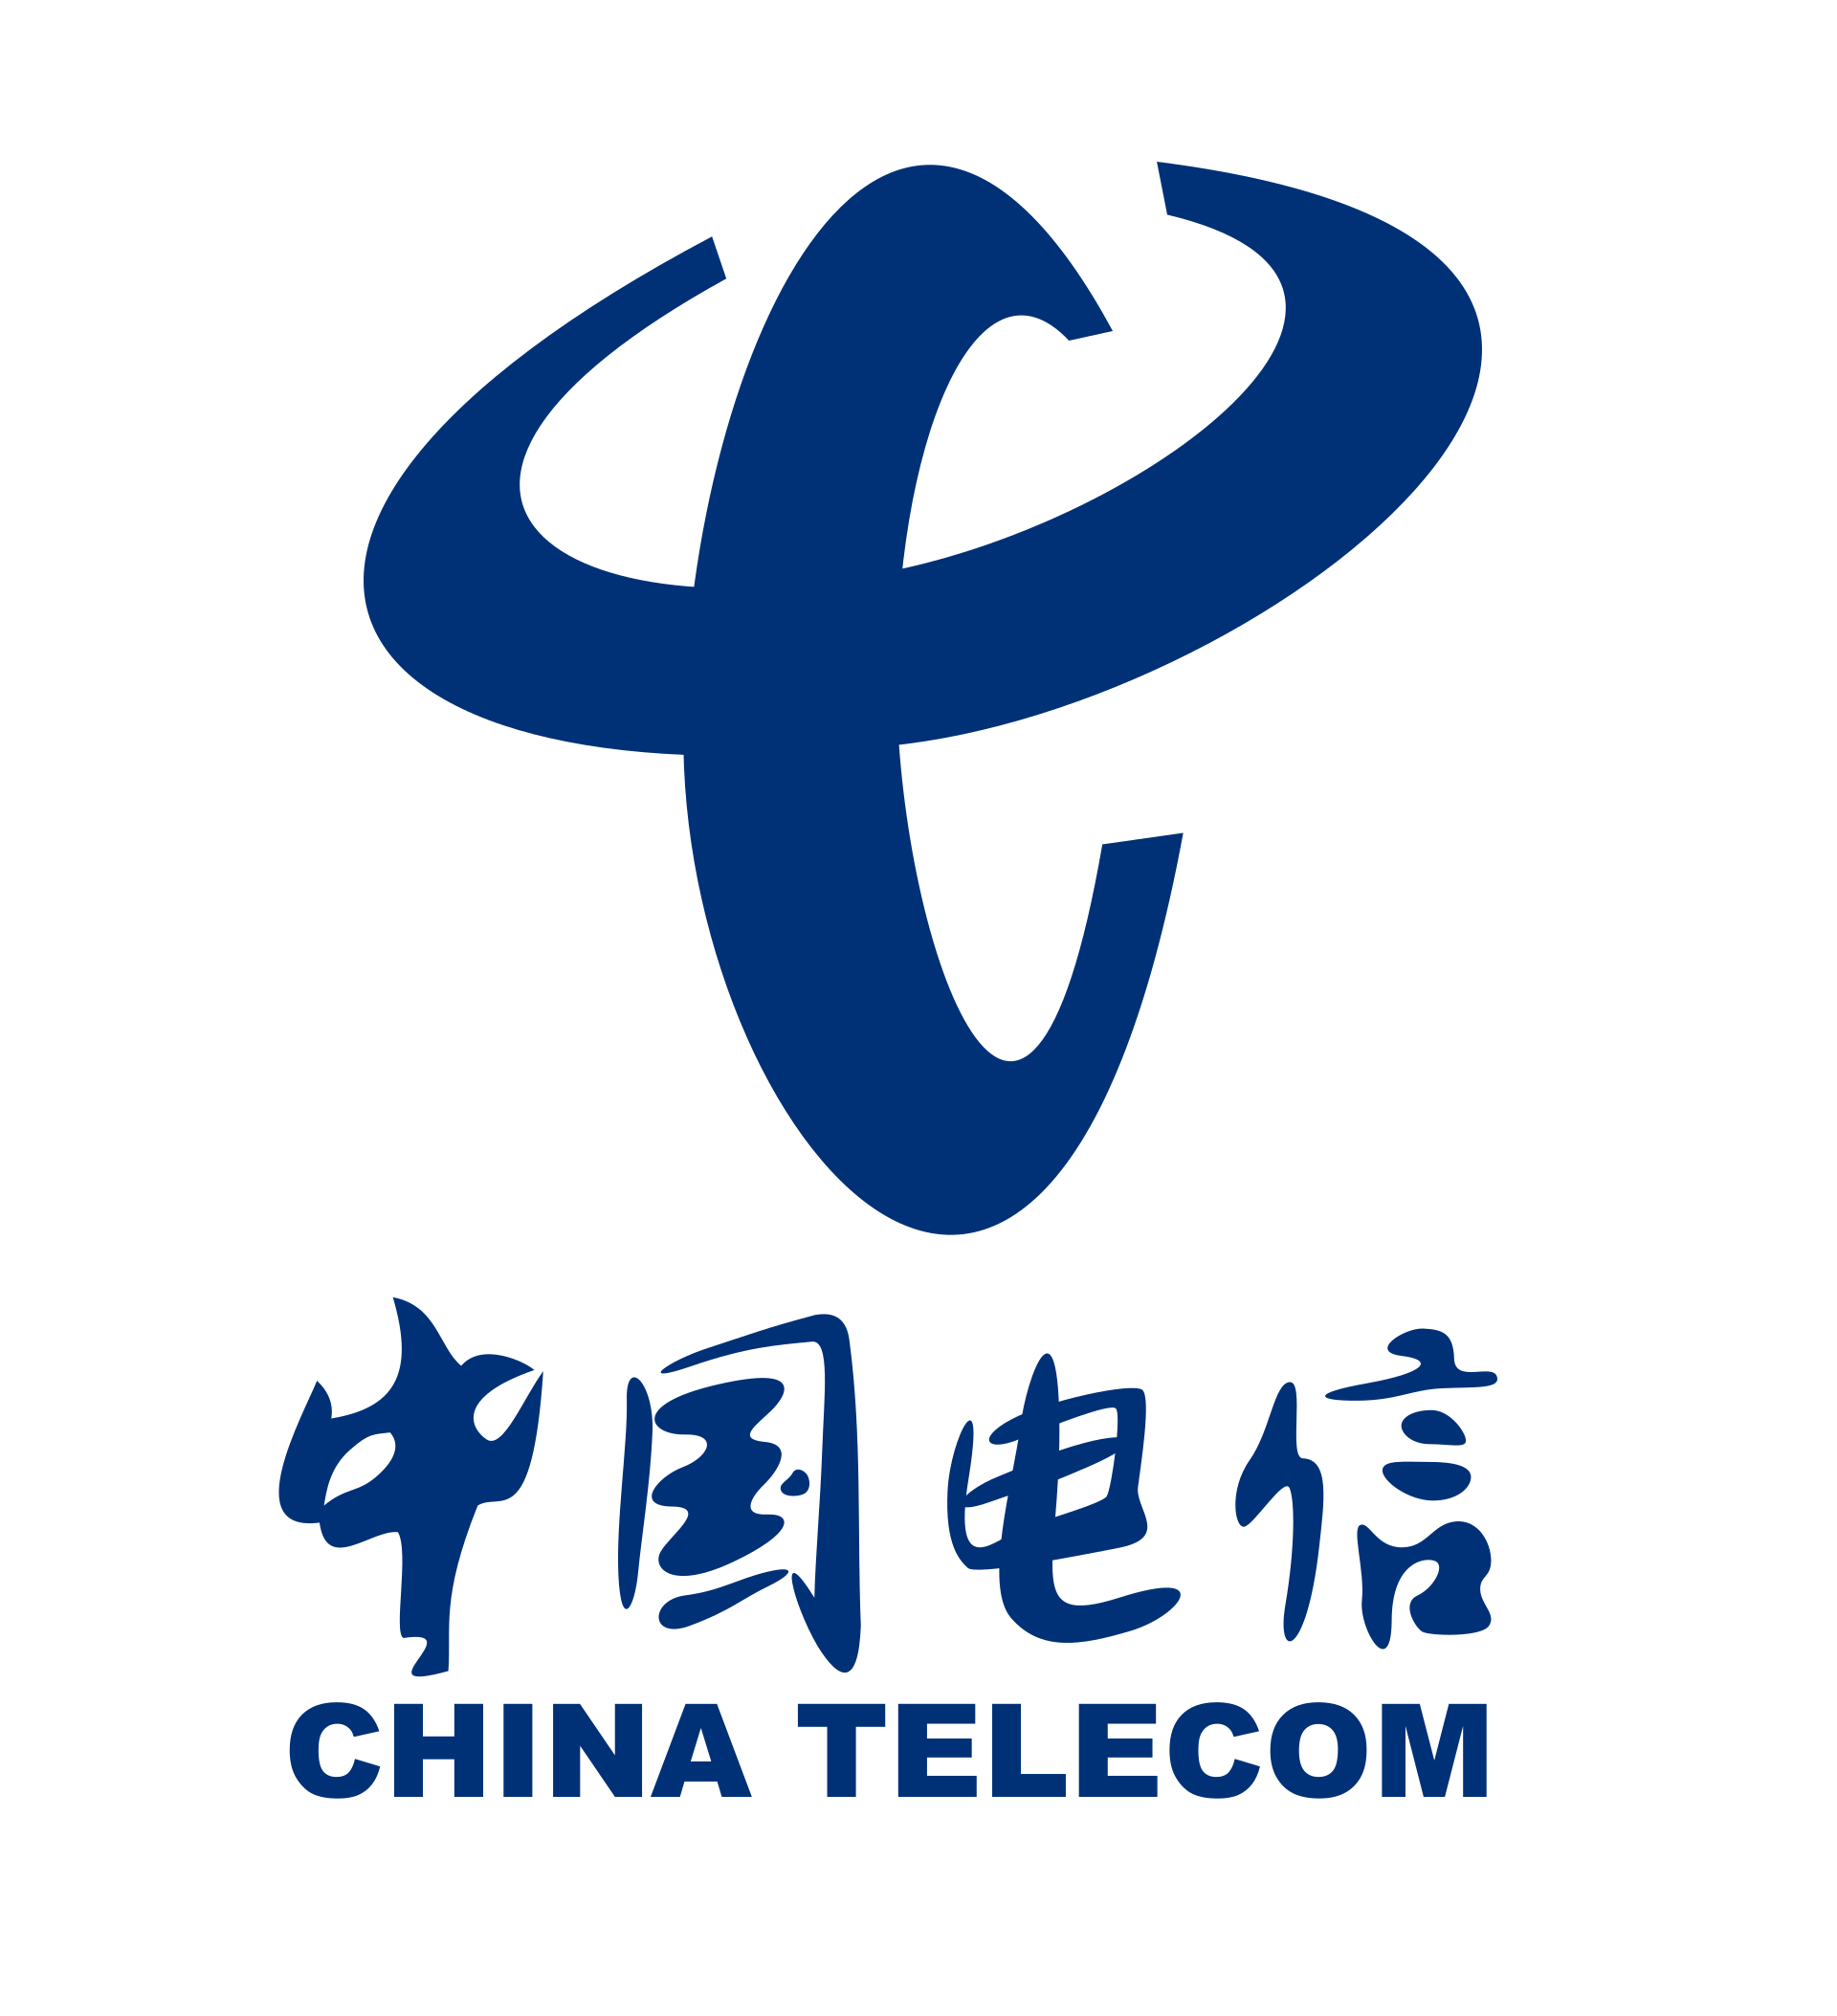 Now I am using China Mobile prepaid SIM card from China Telecom for RMB 129/month – an affordable unlimited internet data to China internet users at province level.